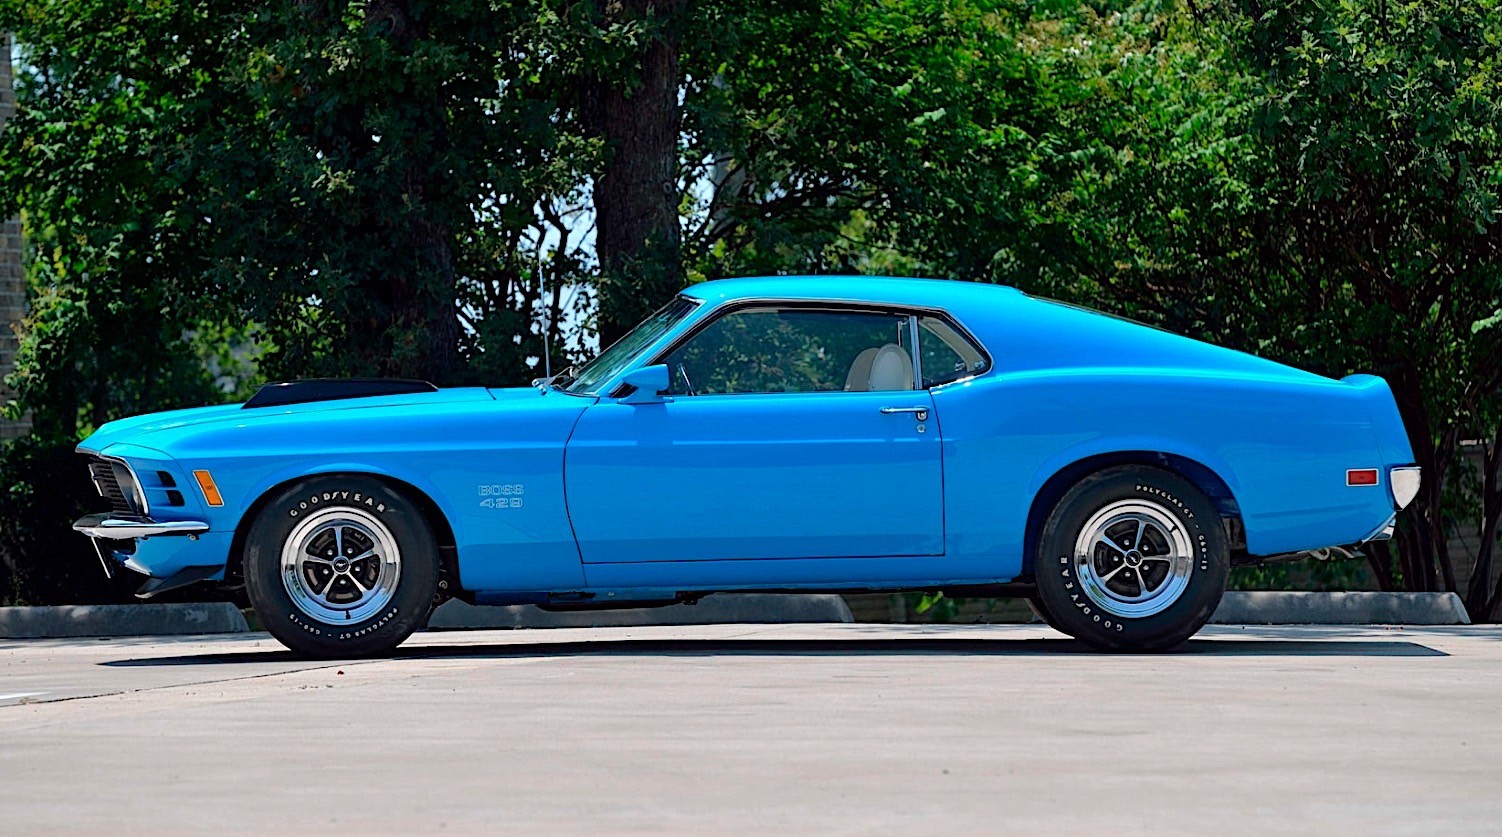 1970 Ford Mustang Boss 429 With Factory Drag Pack Is How You Spell ...